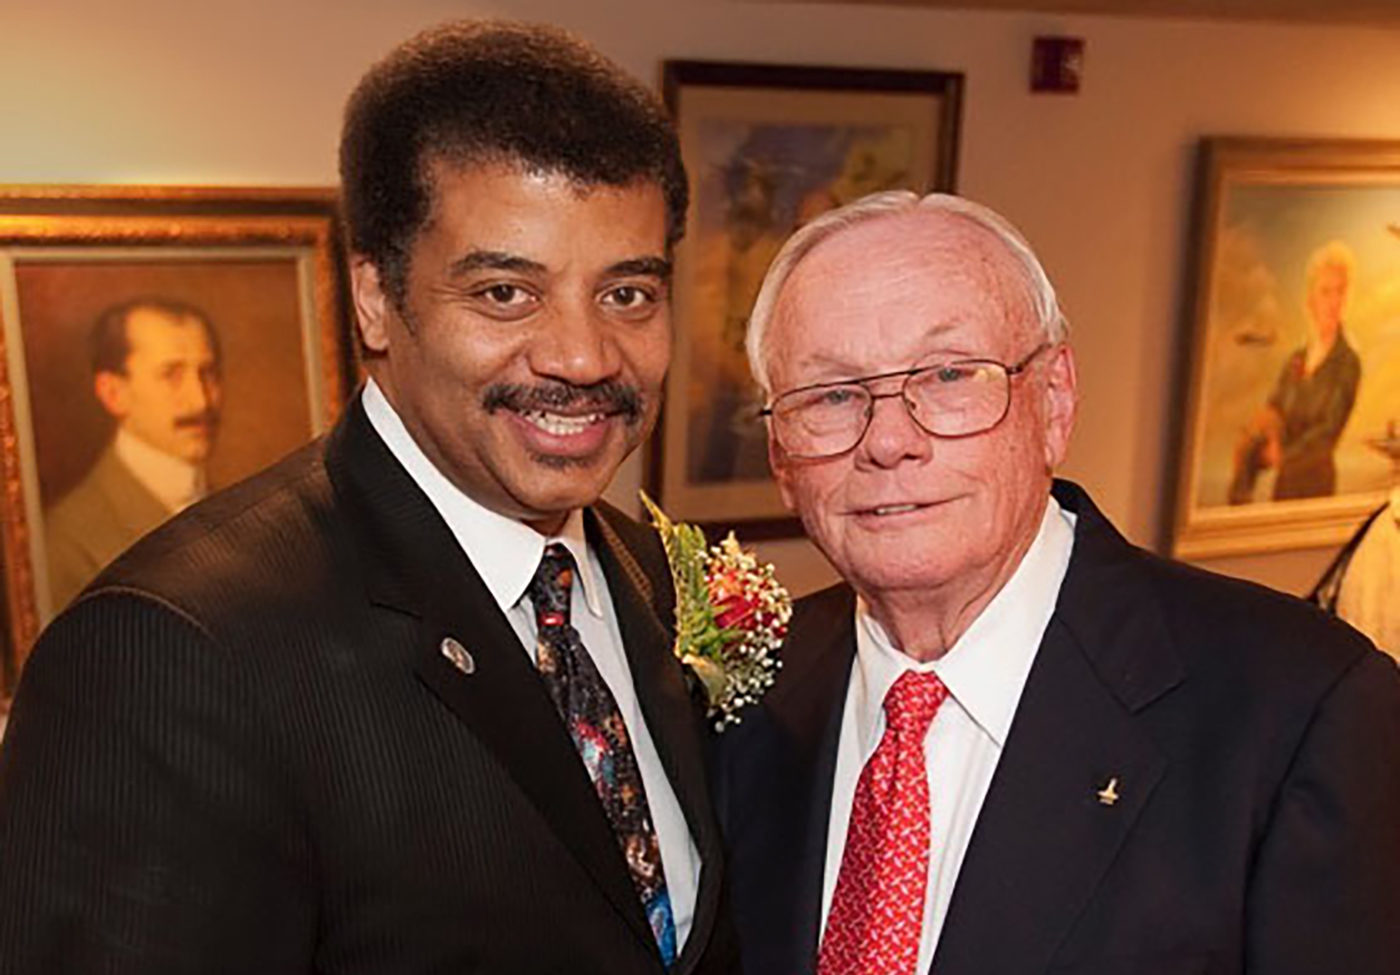 Photo of Neil deGrasse Tyson and Neil Armstrong taken on July 20, 2009 at the 40th Anniversary of Apollo 11 at the National Air and Space Museum. © Tyson Archives.